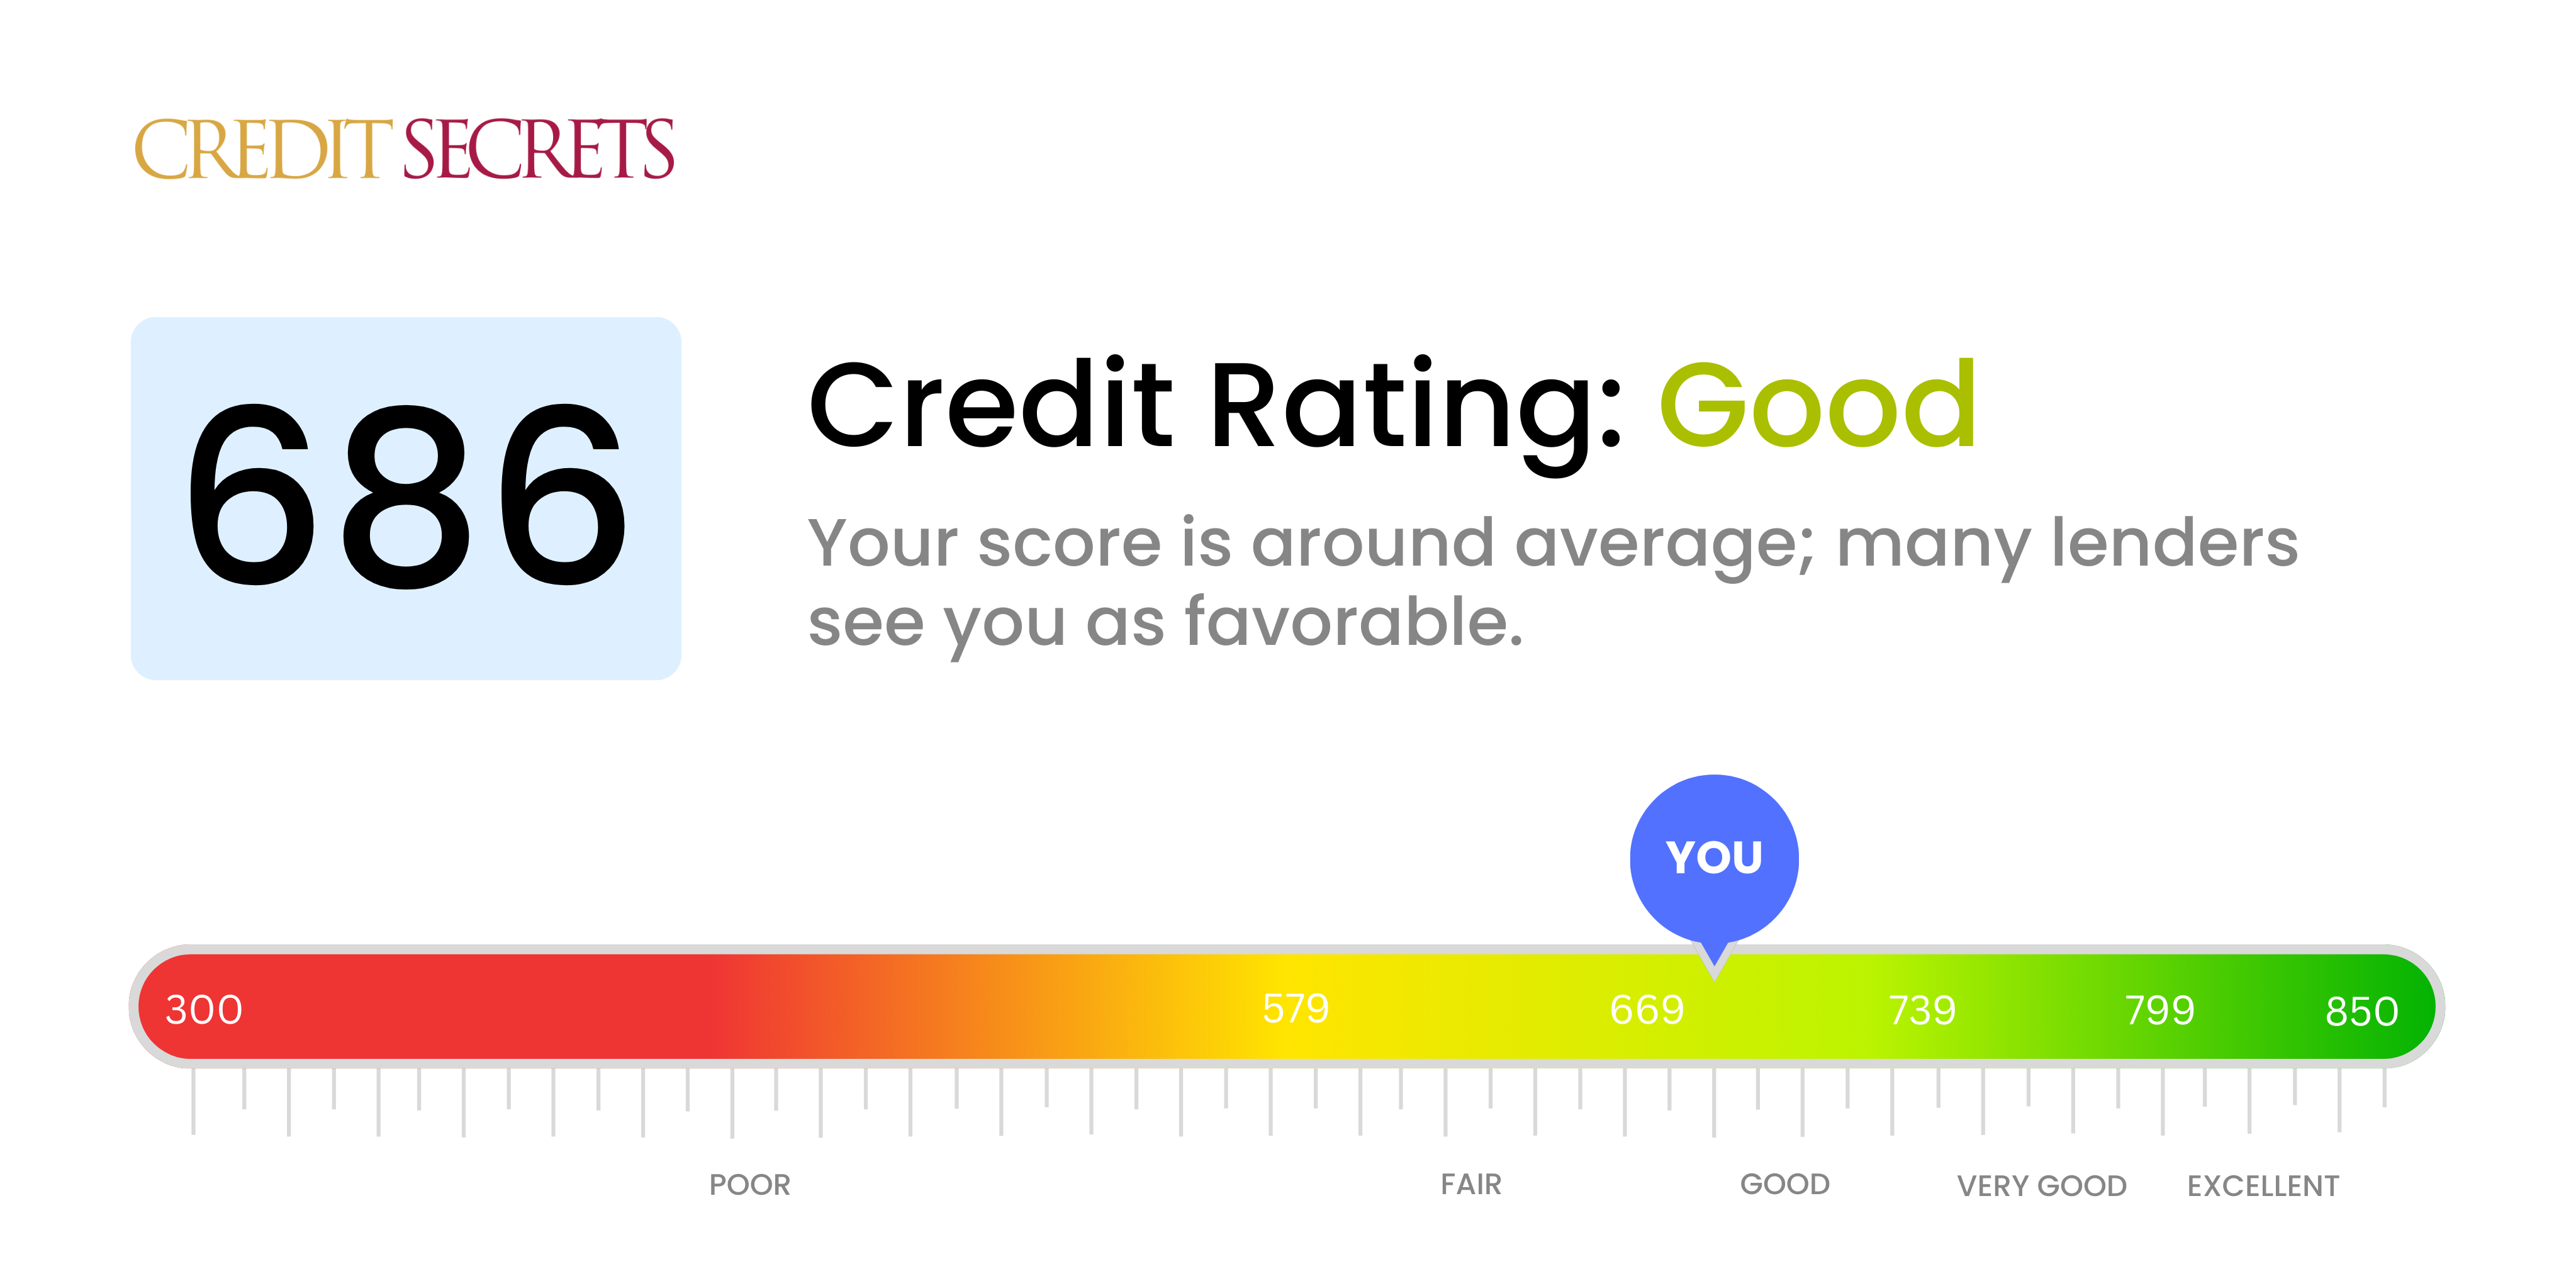 Is 686 a good credit score?